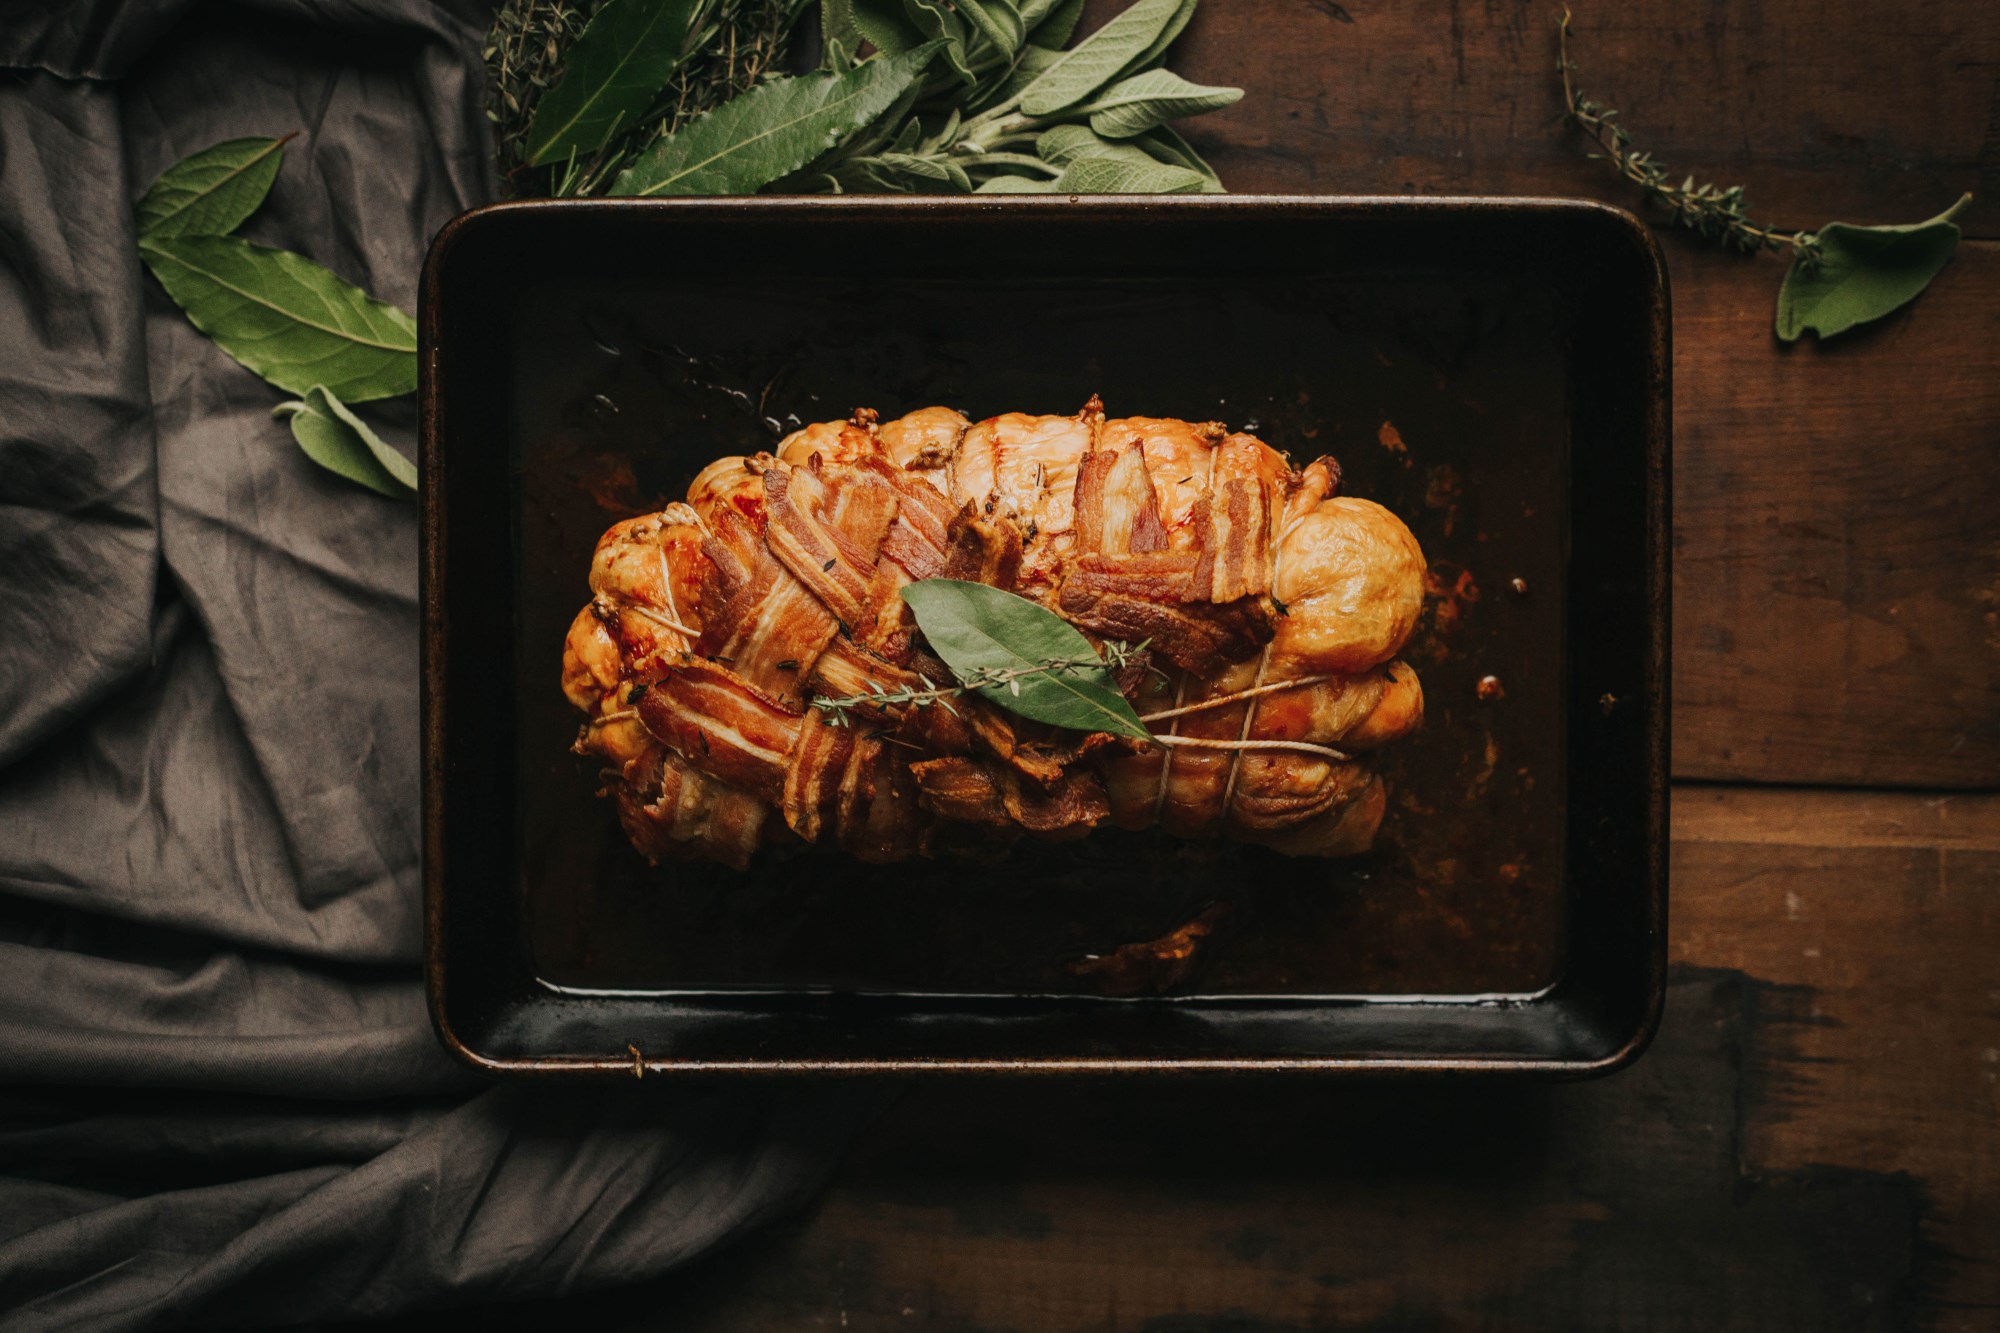 Premium local turkey breast joint - 2.5kg - Sage and Red Onion Stuffing